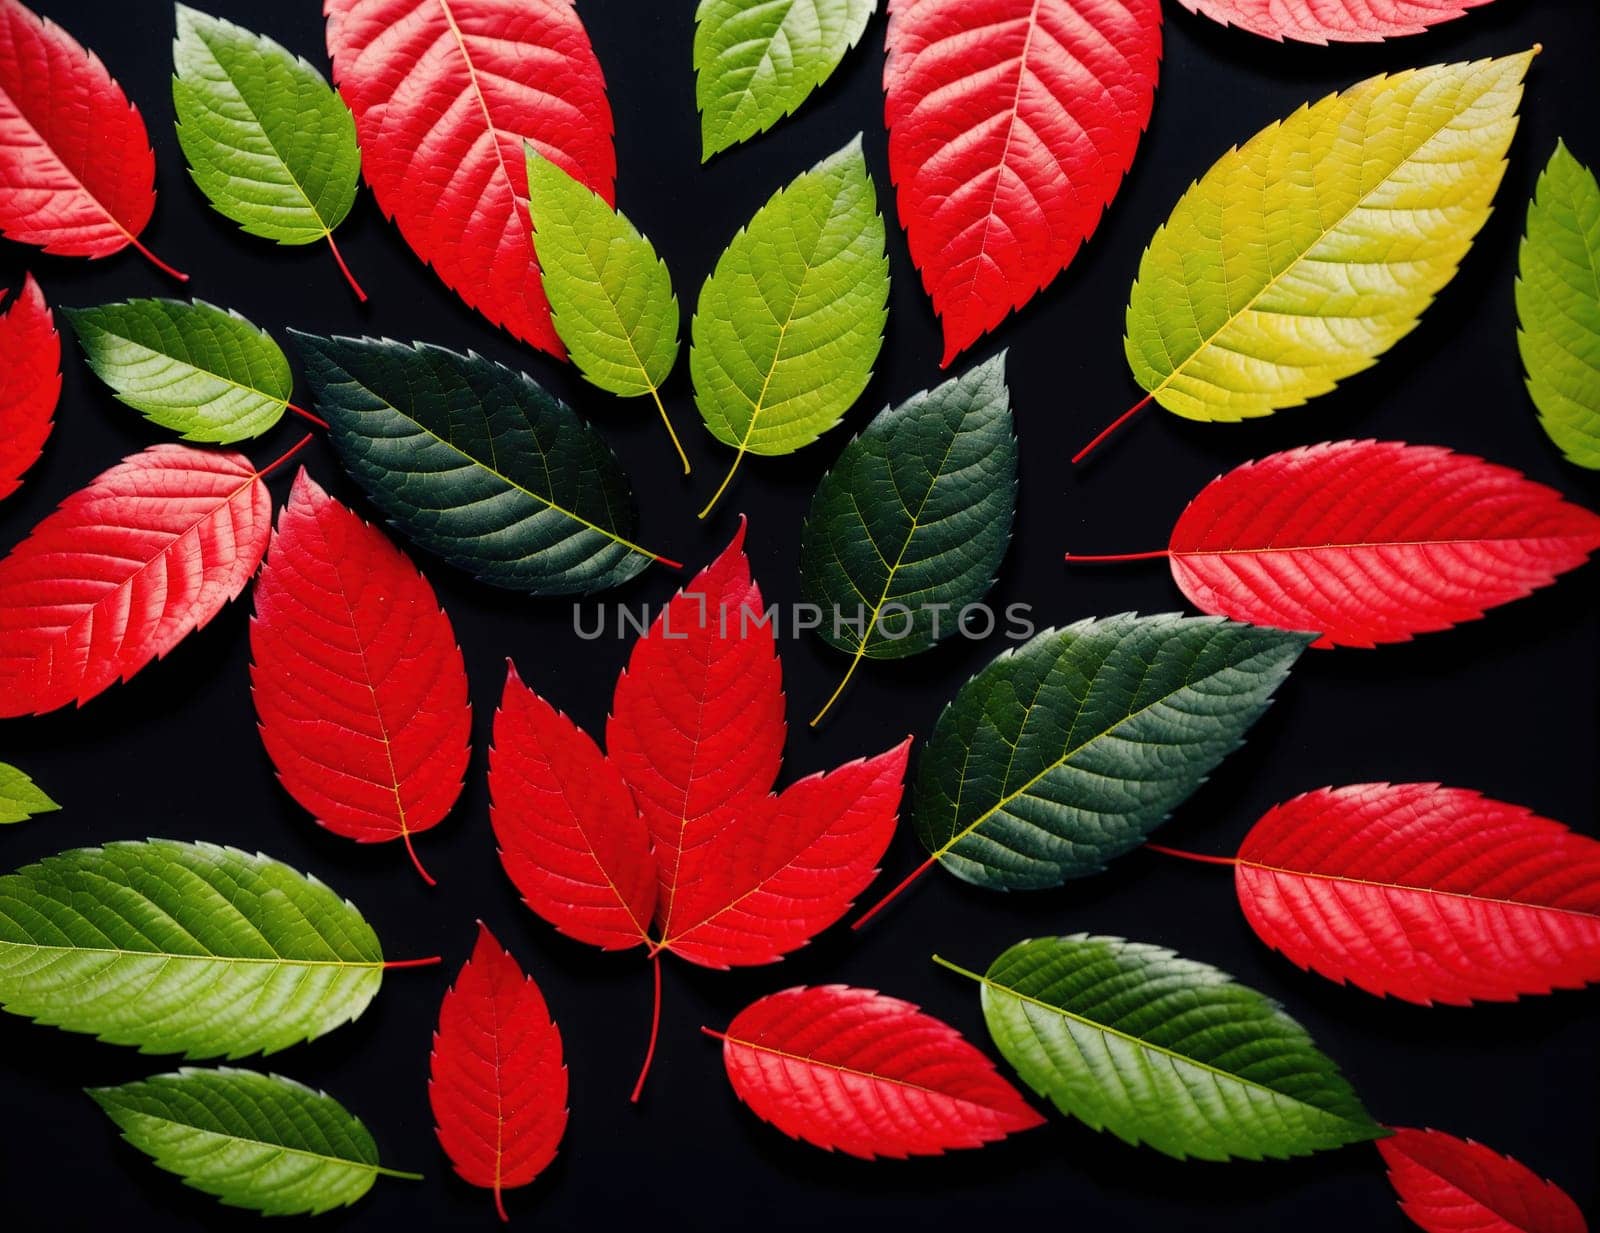 The image shows a group of colorful leaves arranged in a circular shape on a black background.